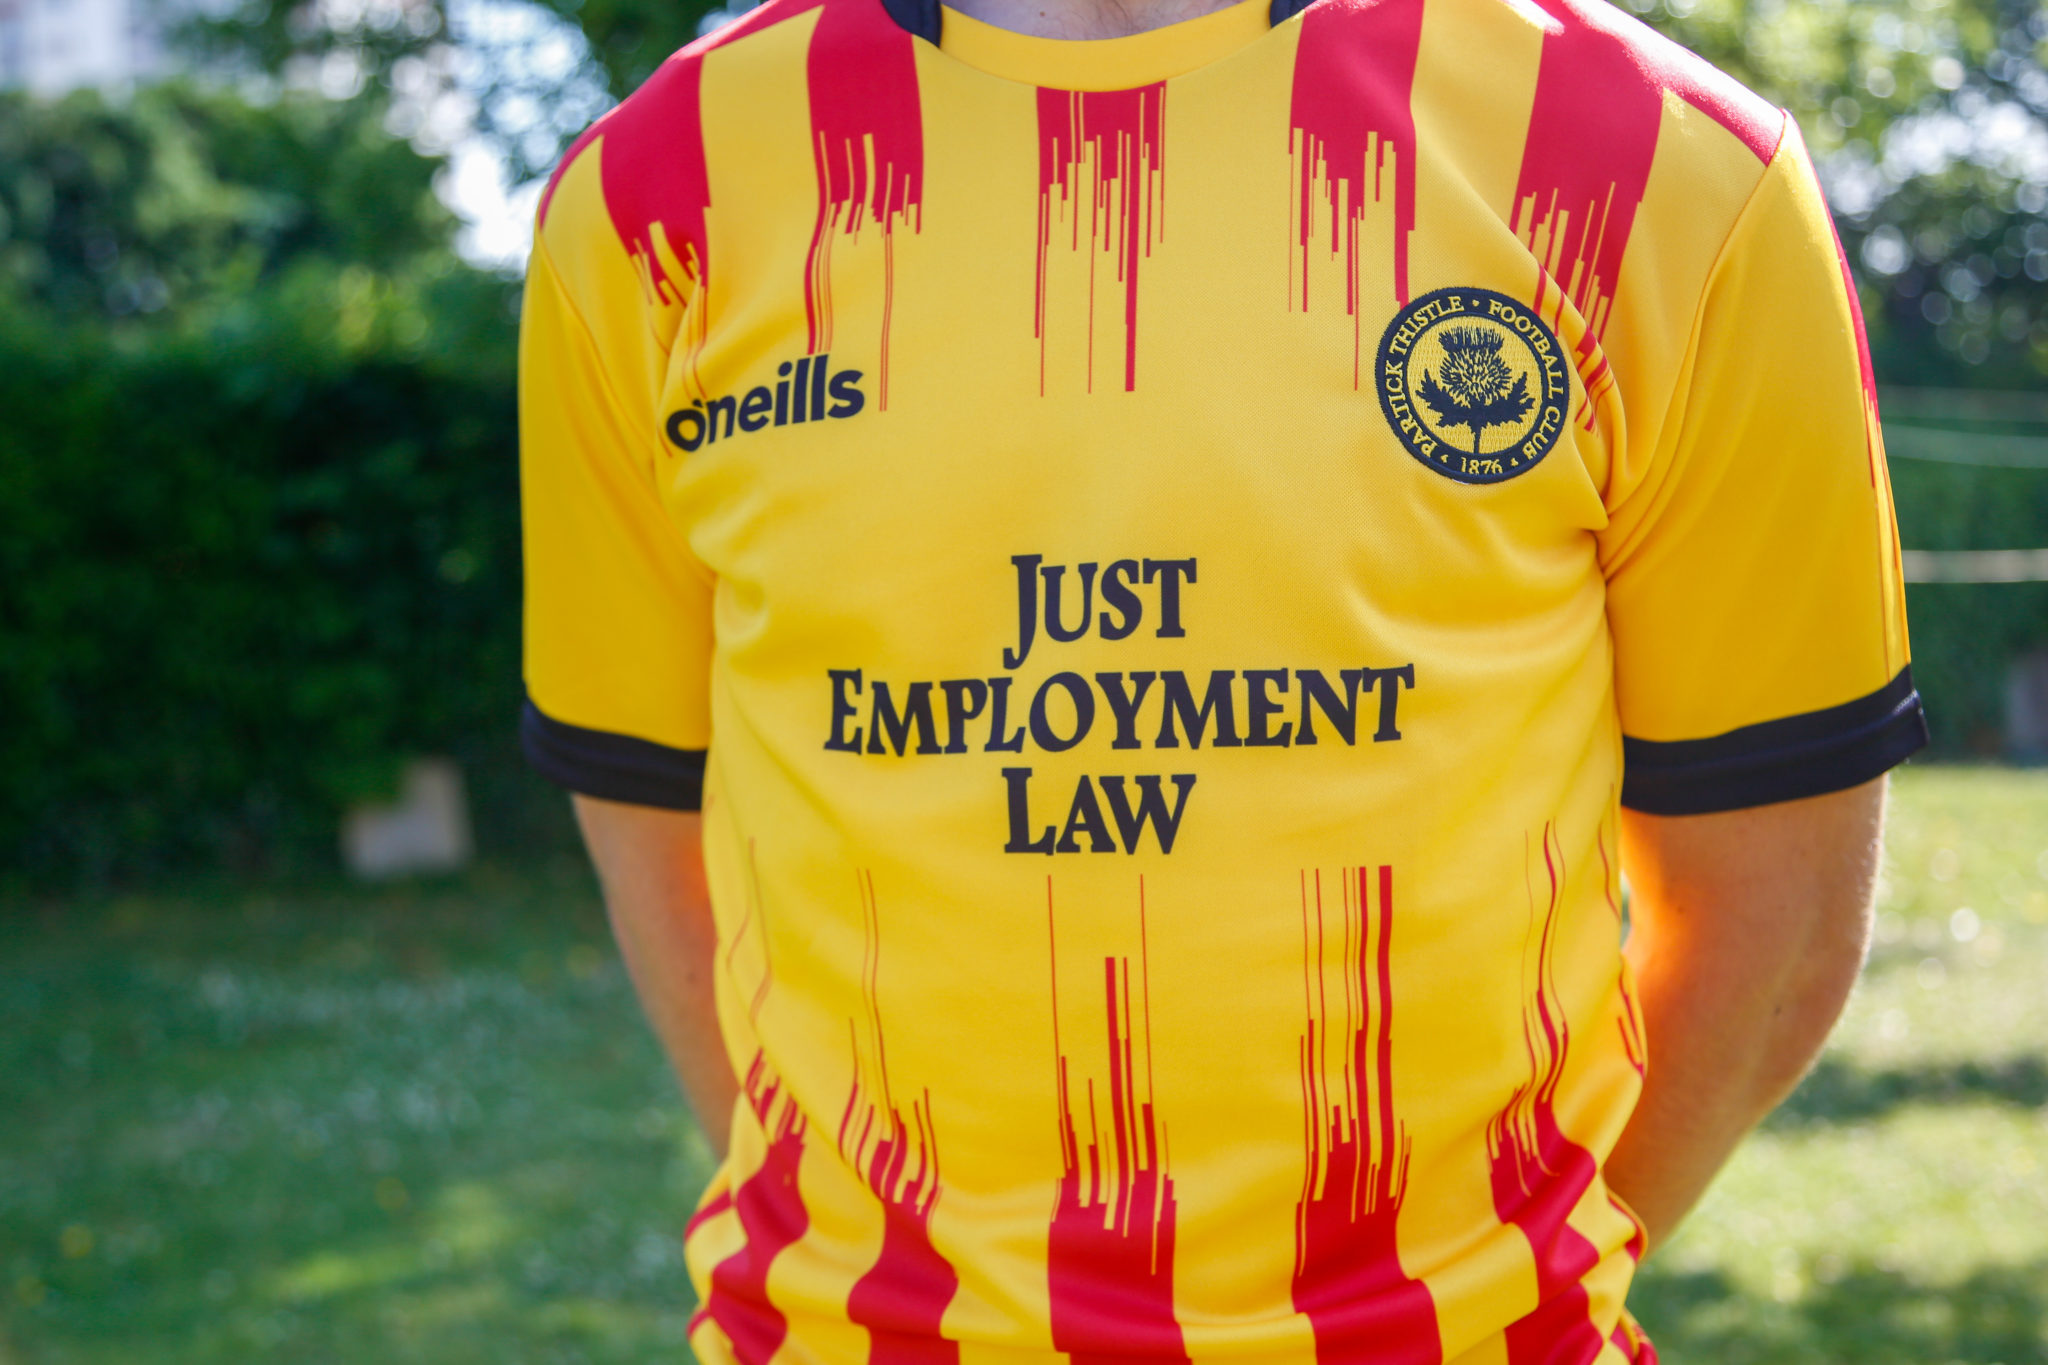 PARTICK THISTLE FC Joma Home Football Shirt 2019-2020 NEW BNWT Top Jersey Kit 